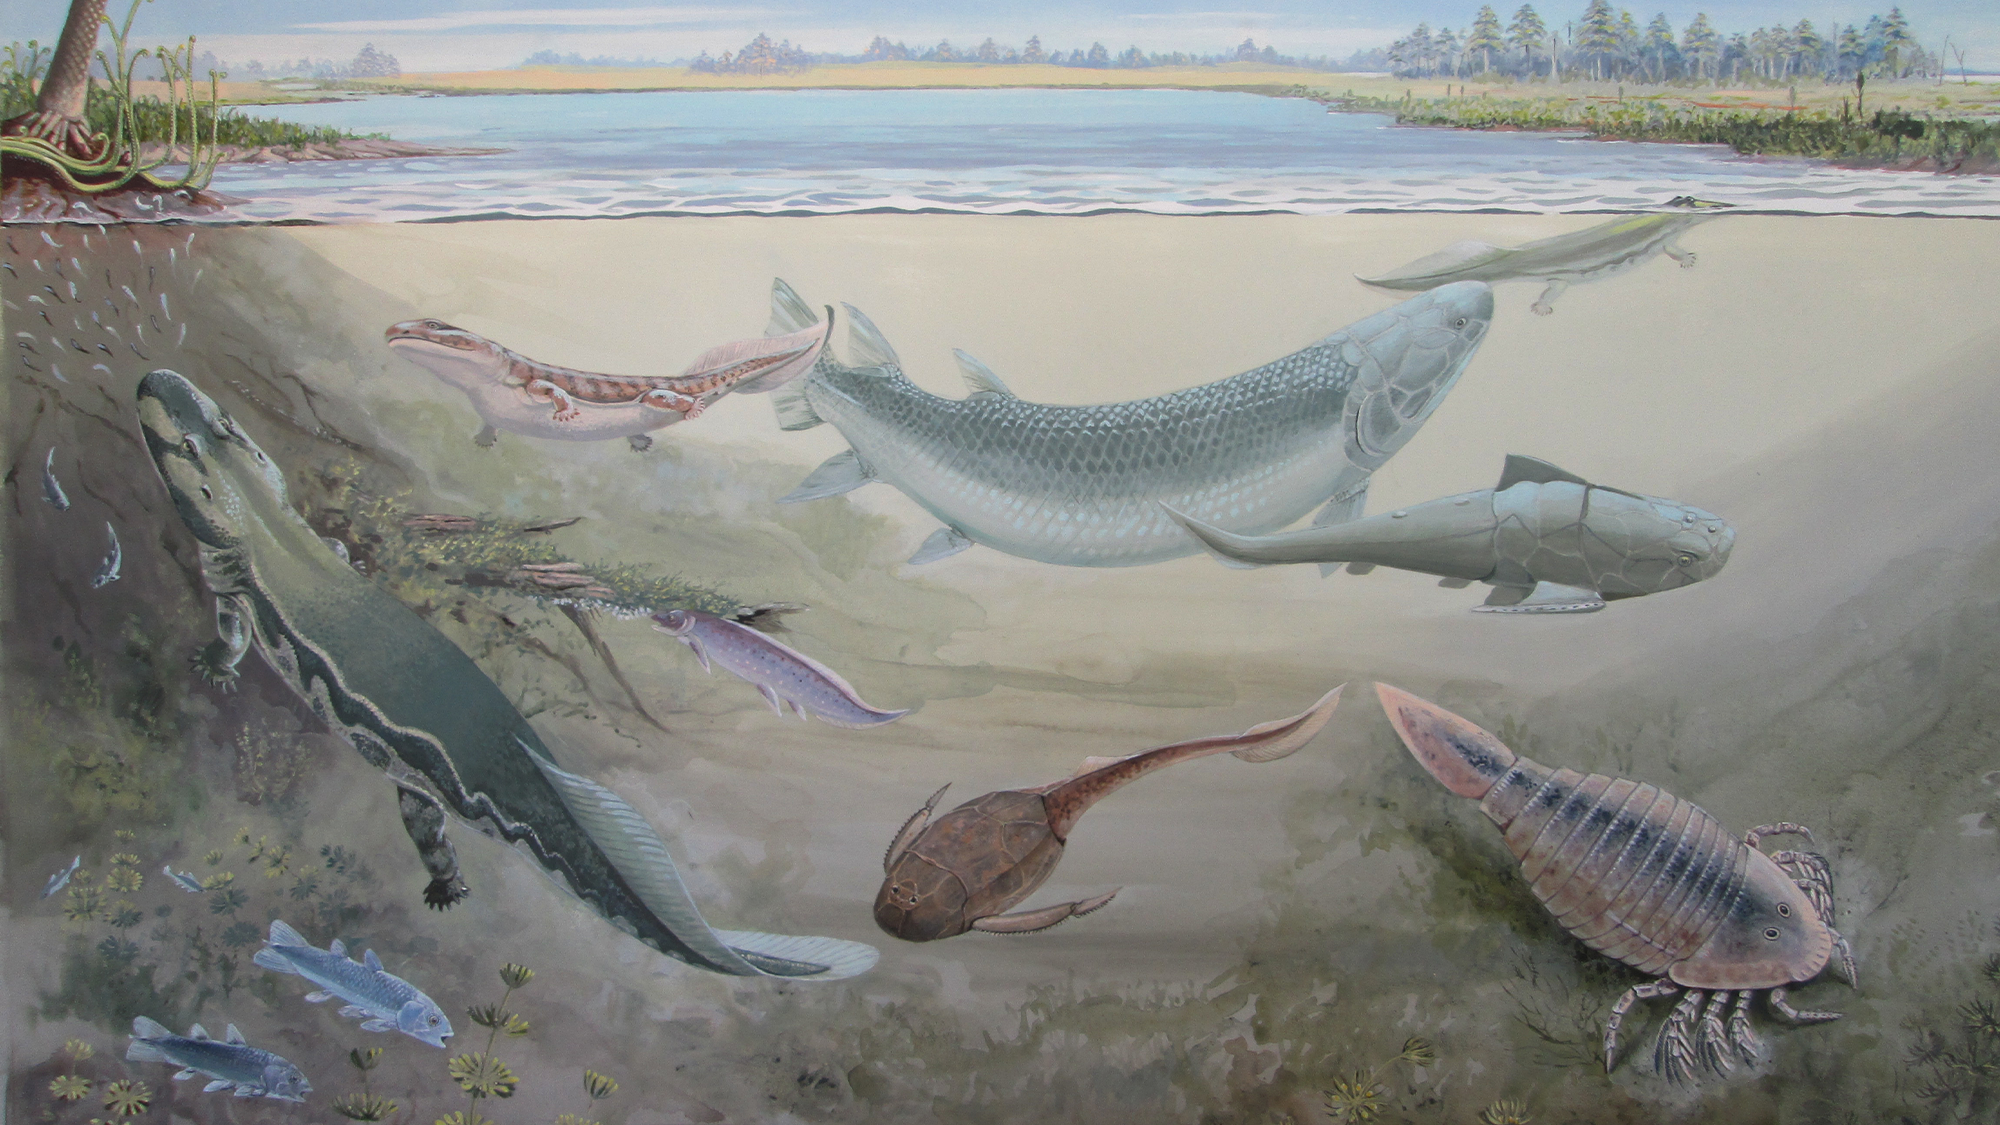 A gator-faced fish shaped like a torpedo stalked rivers 360 million years ago